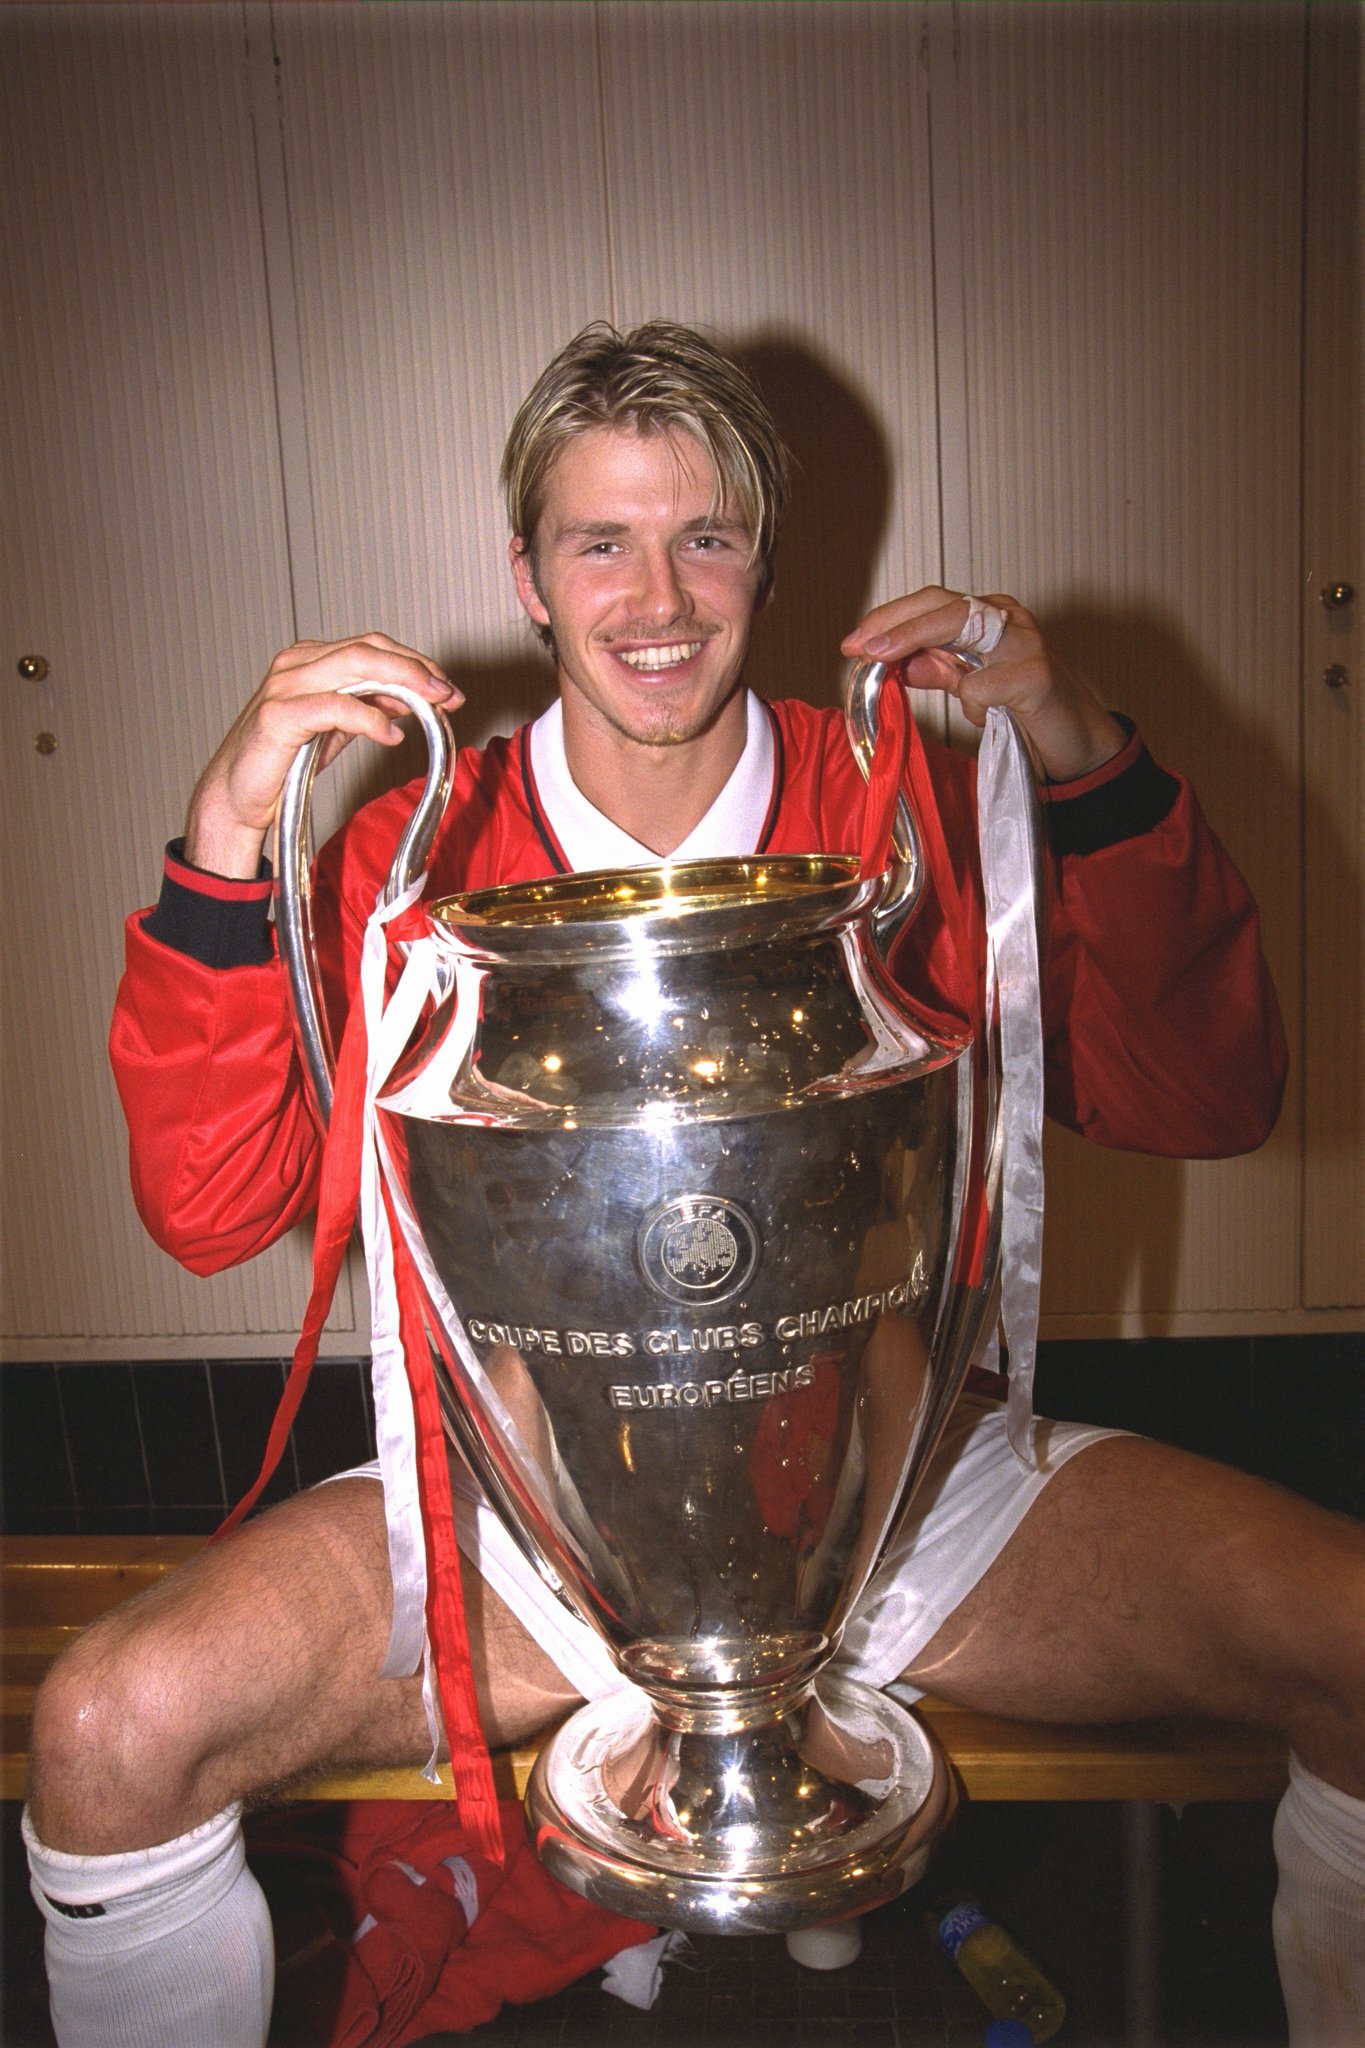 Happy birthday to David Beckham.

We all had at least one of his hairstyles growing up 